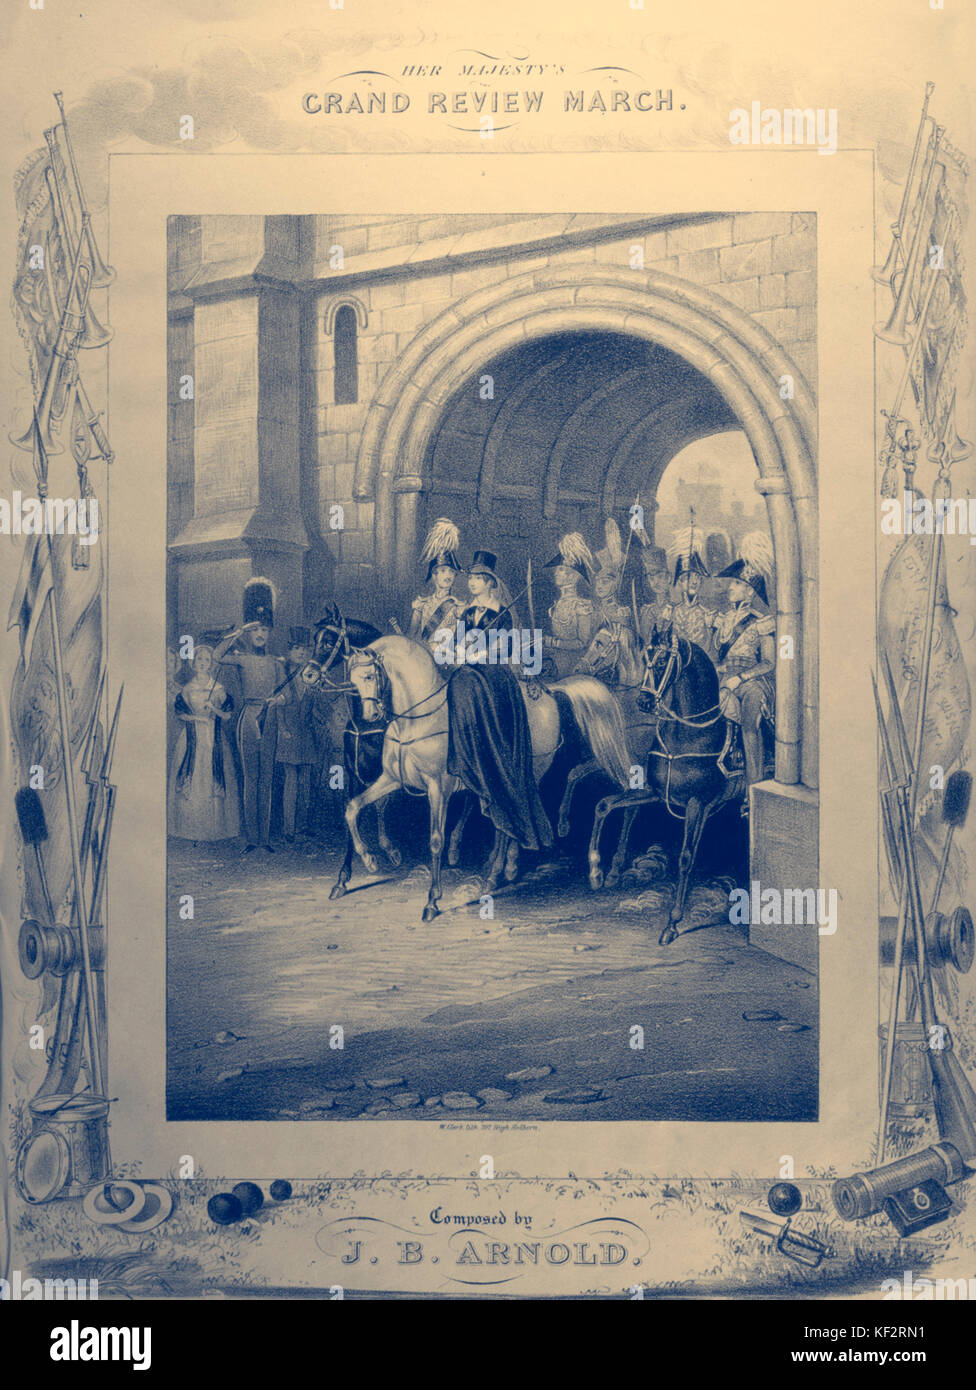 VICTORIA & ALBERT - Grand Review March Cover of score, c1840, showing Victoria & Albert, riding through gate on horseback. Music by J B Arnold Stock Photo